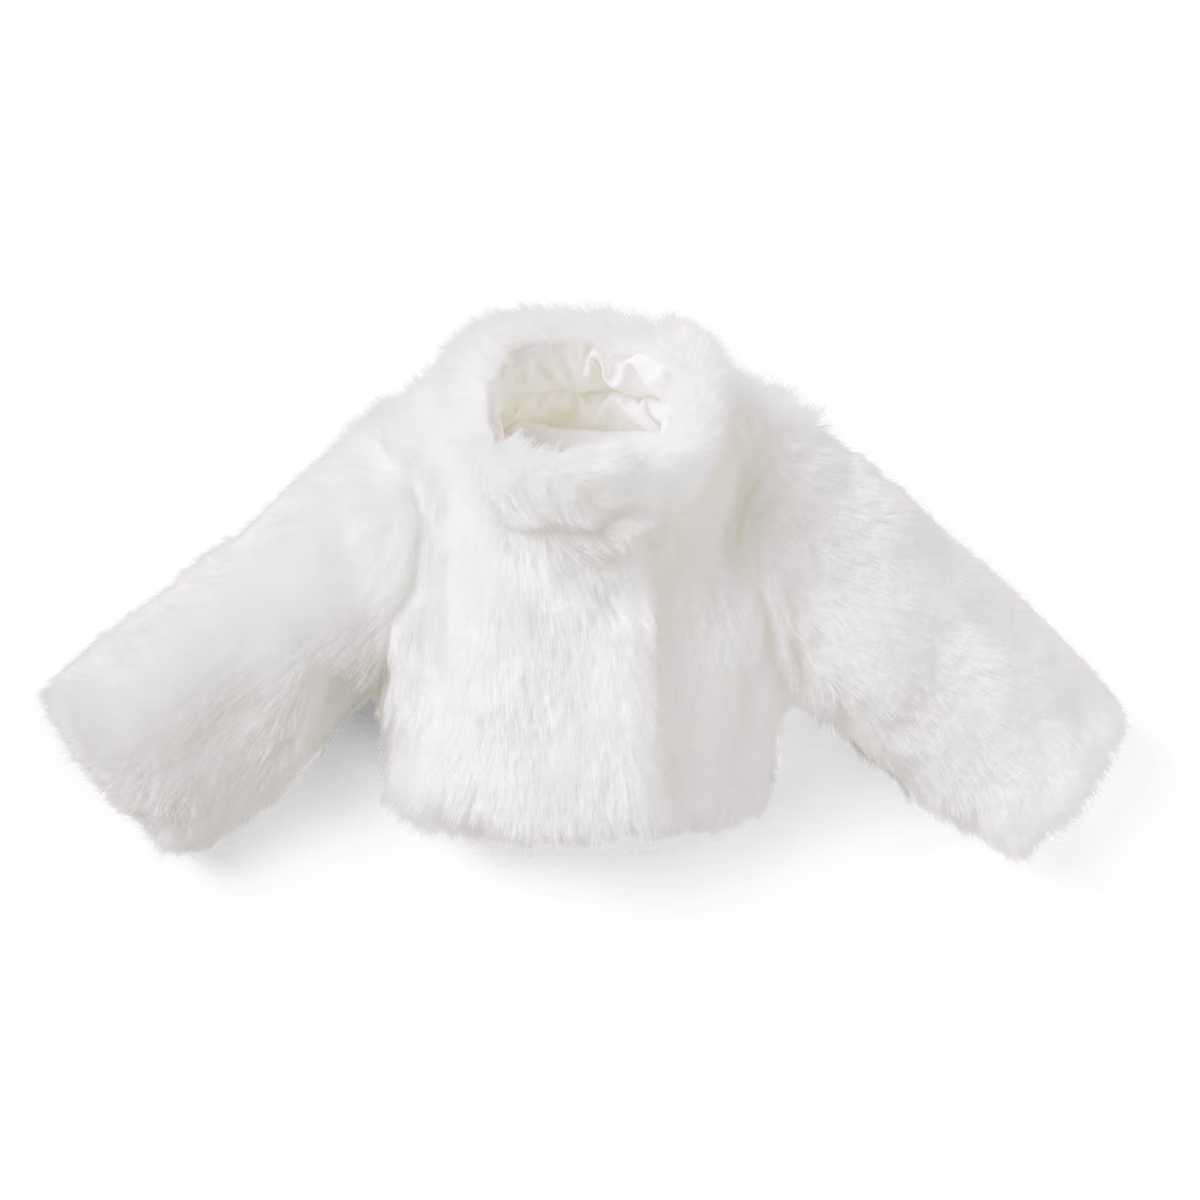 American Girl x Janie and Jack Soft as Snow Fur Jacket for 18-inch Dolls - Simon's Collectibles